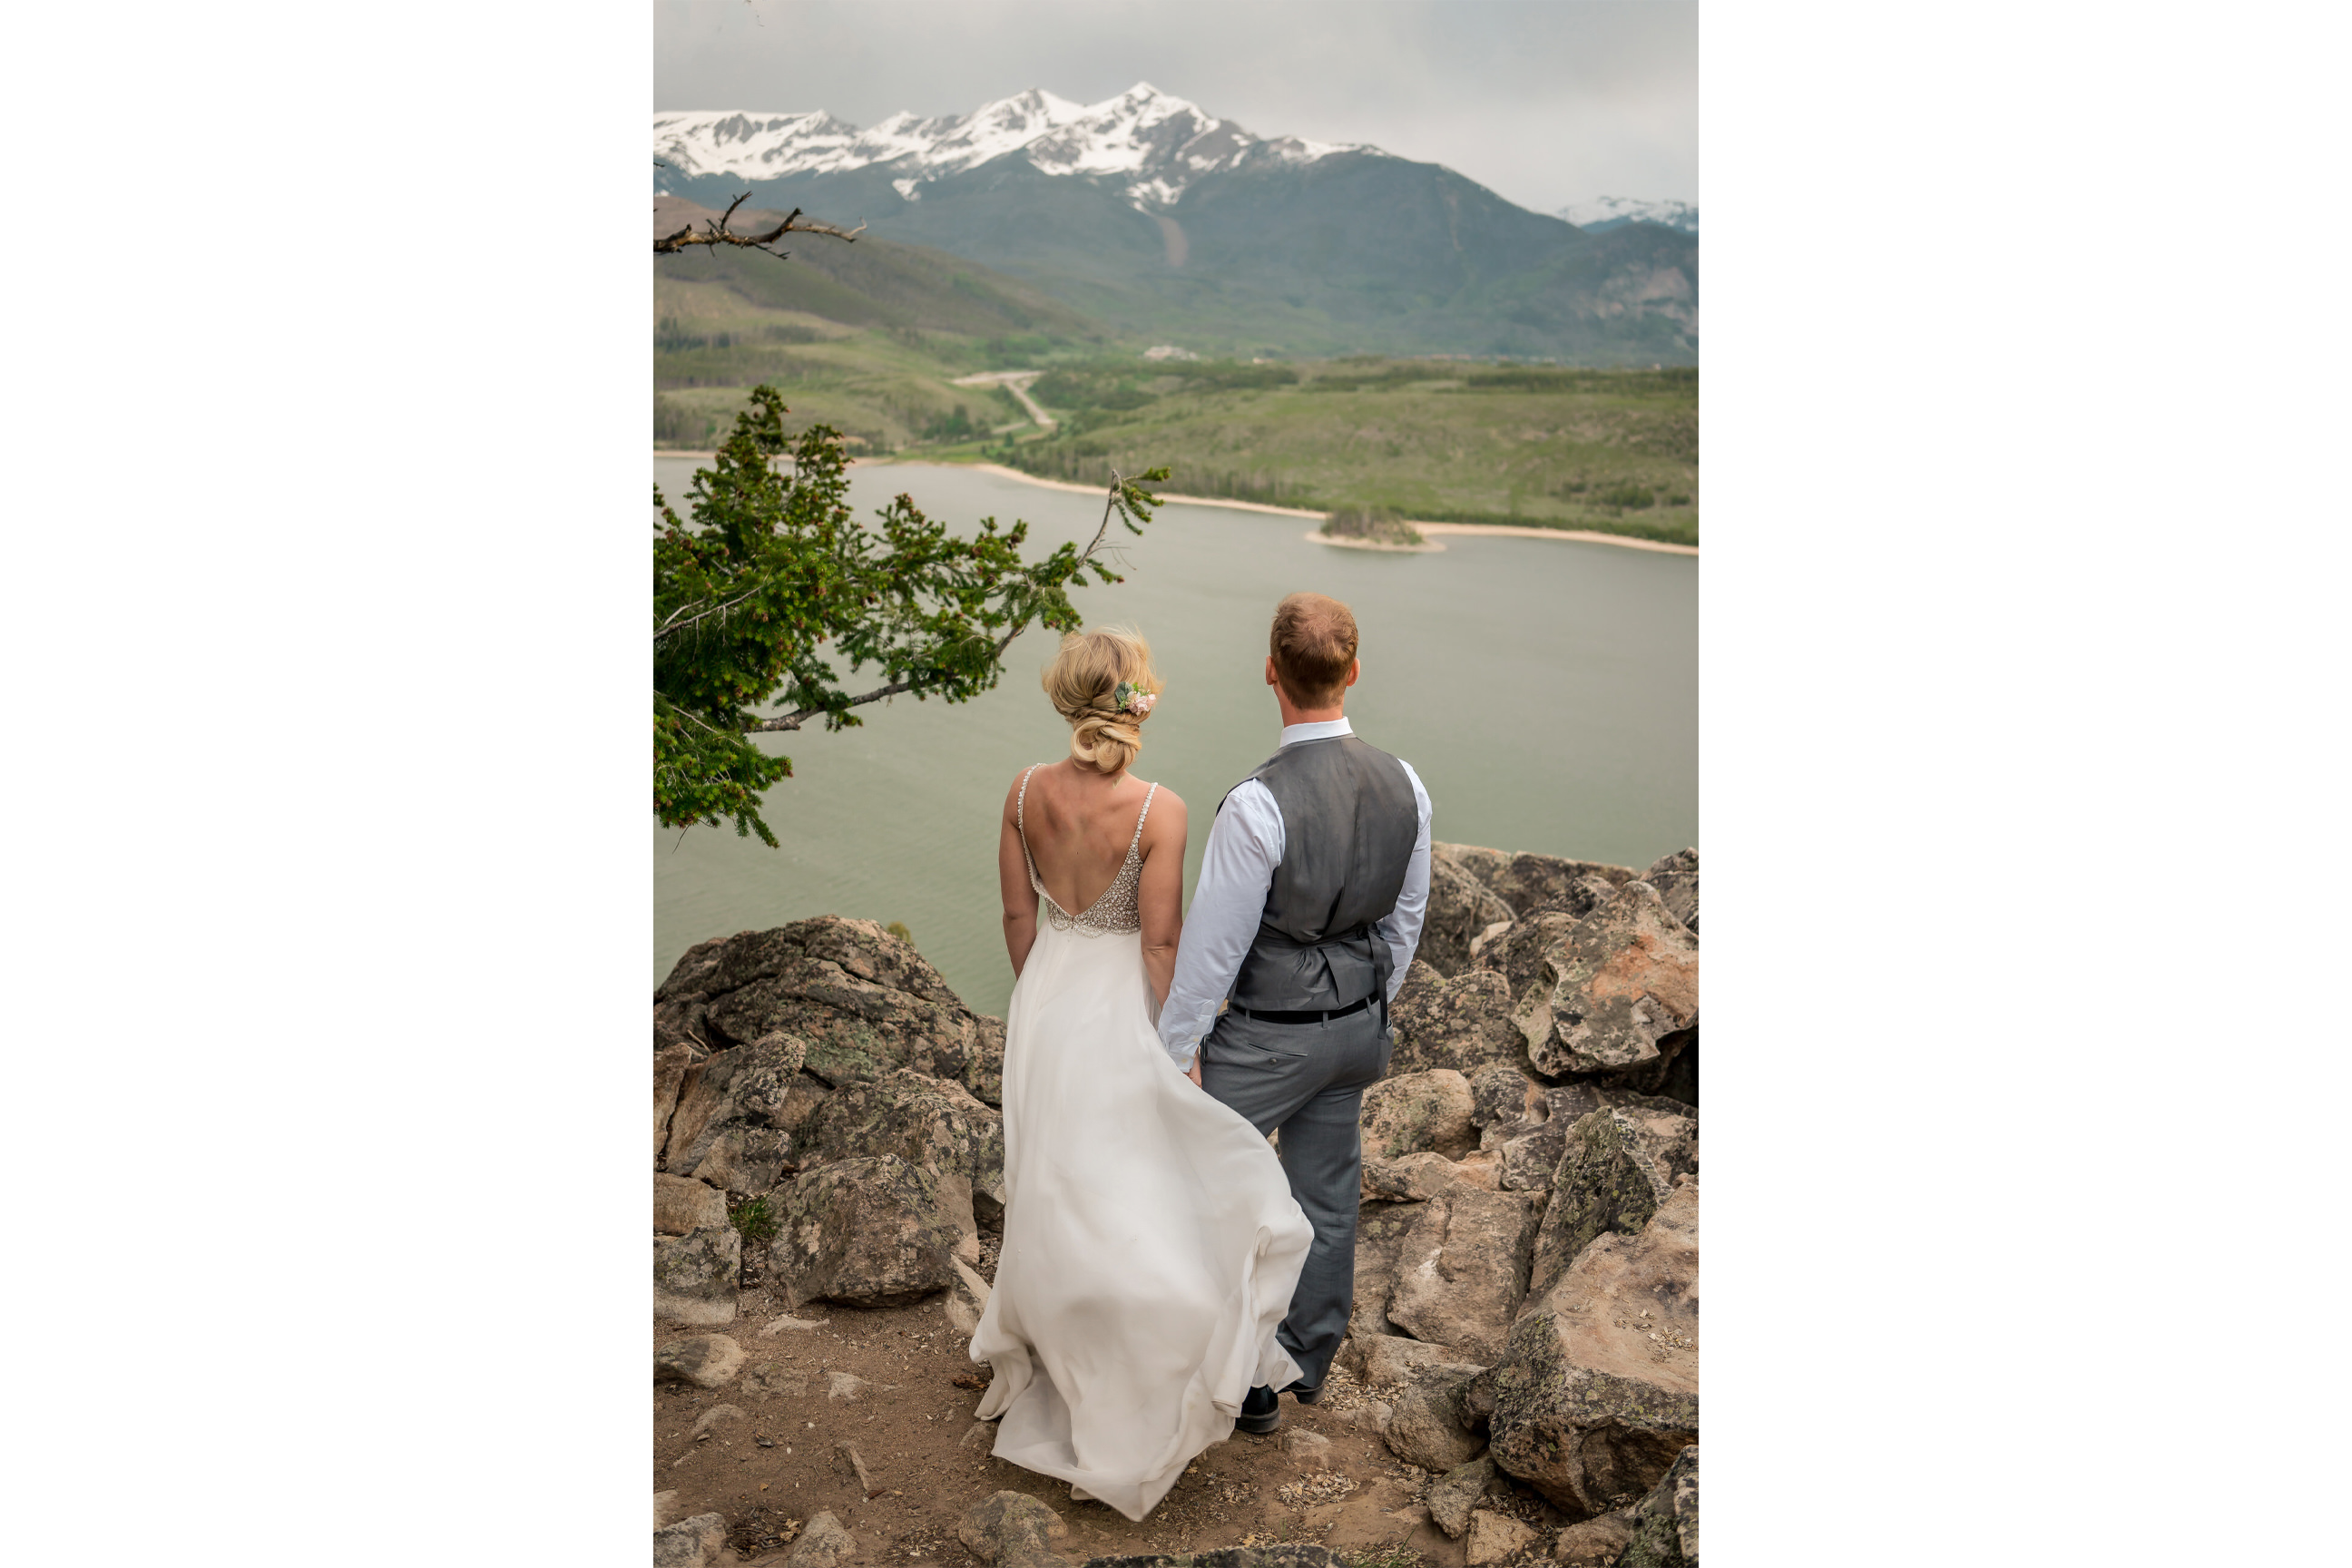 A bride and groom standing on top of a mountain overlooking a lake.